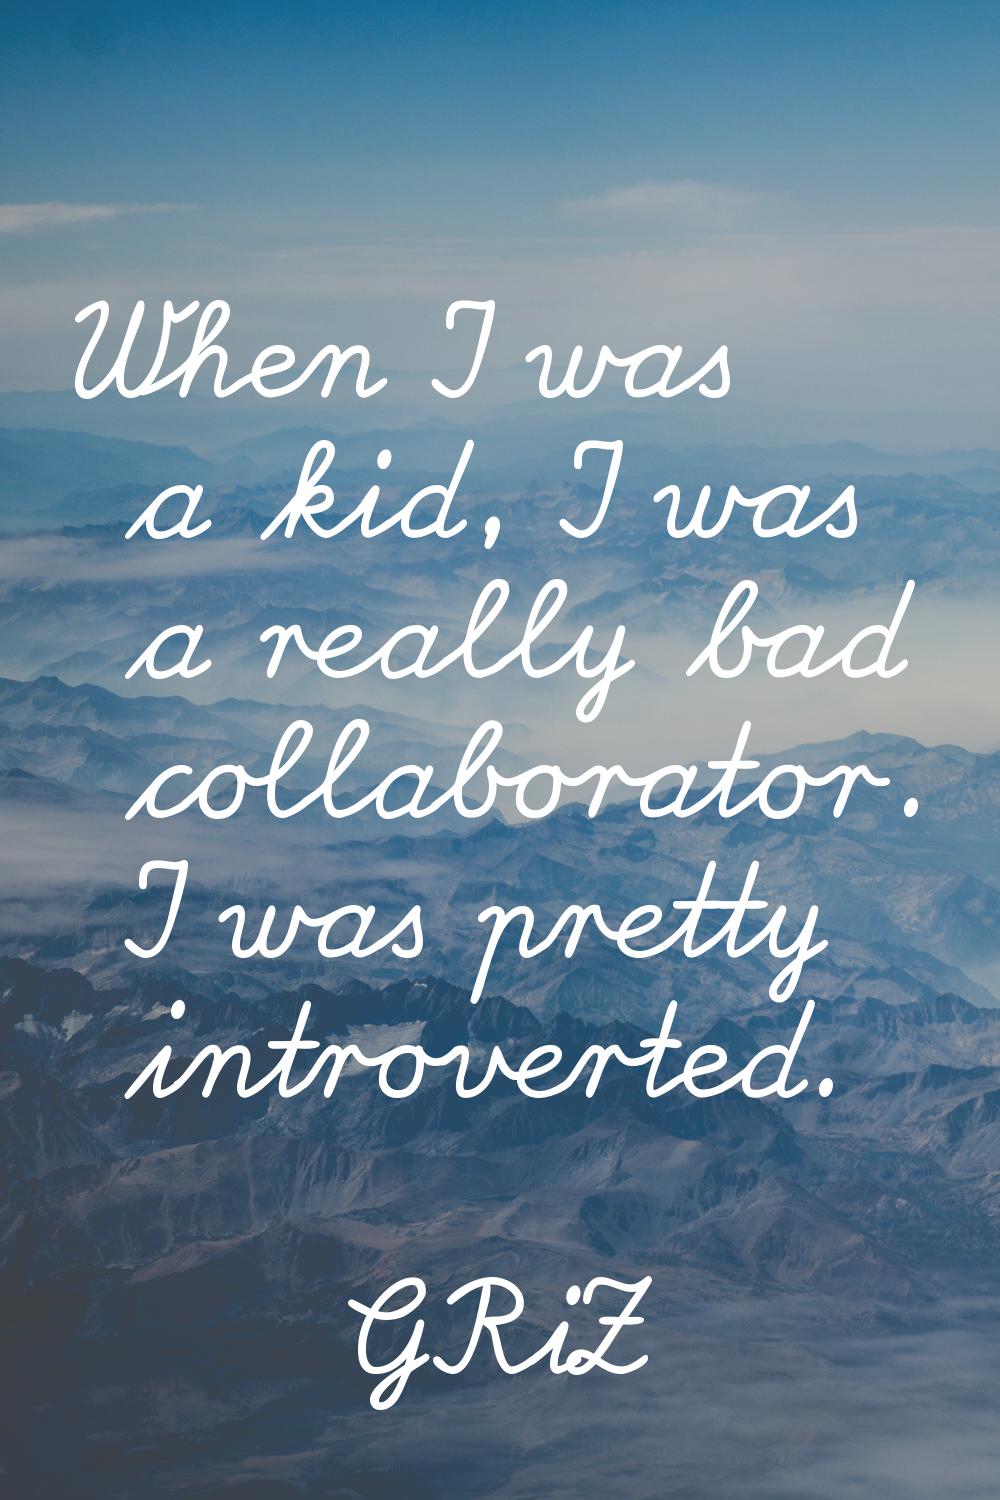 When I was a kid, I was a really bad collaborator. I was pretty introverted.